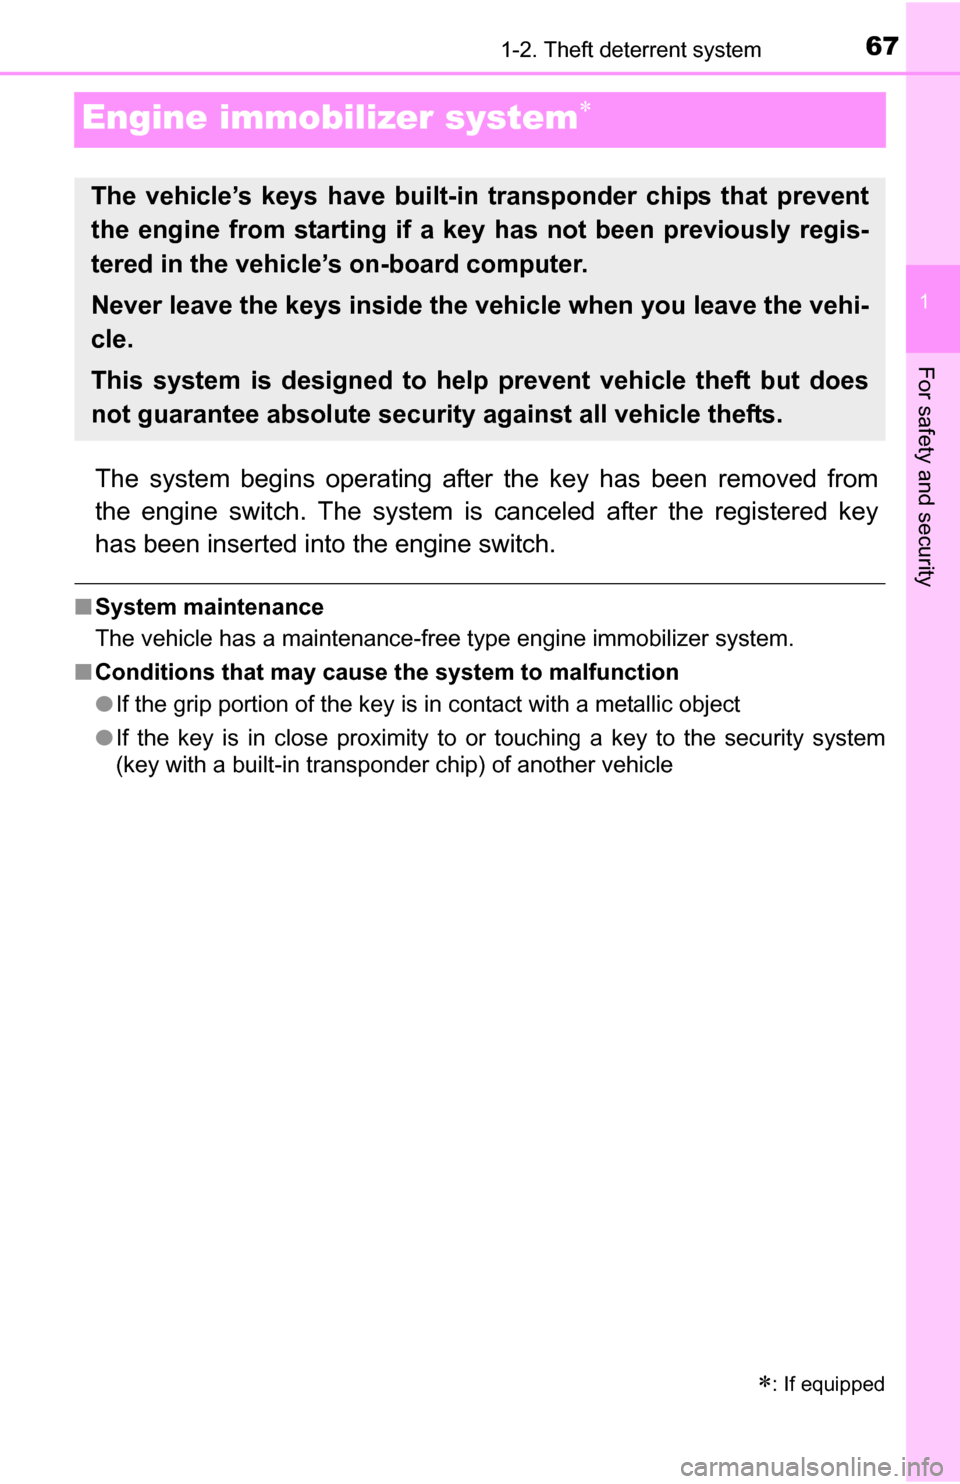 TOYOTA YARIS 2016 3.G User Guide 671-2. Theft deterrent system
1
For safety and security
Engine immobilizer system
The system begins operating after the key has been removed from
the engine switch. The system is canceled after the